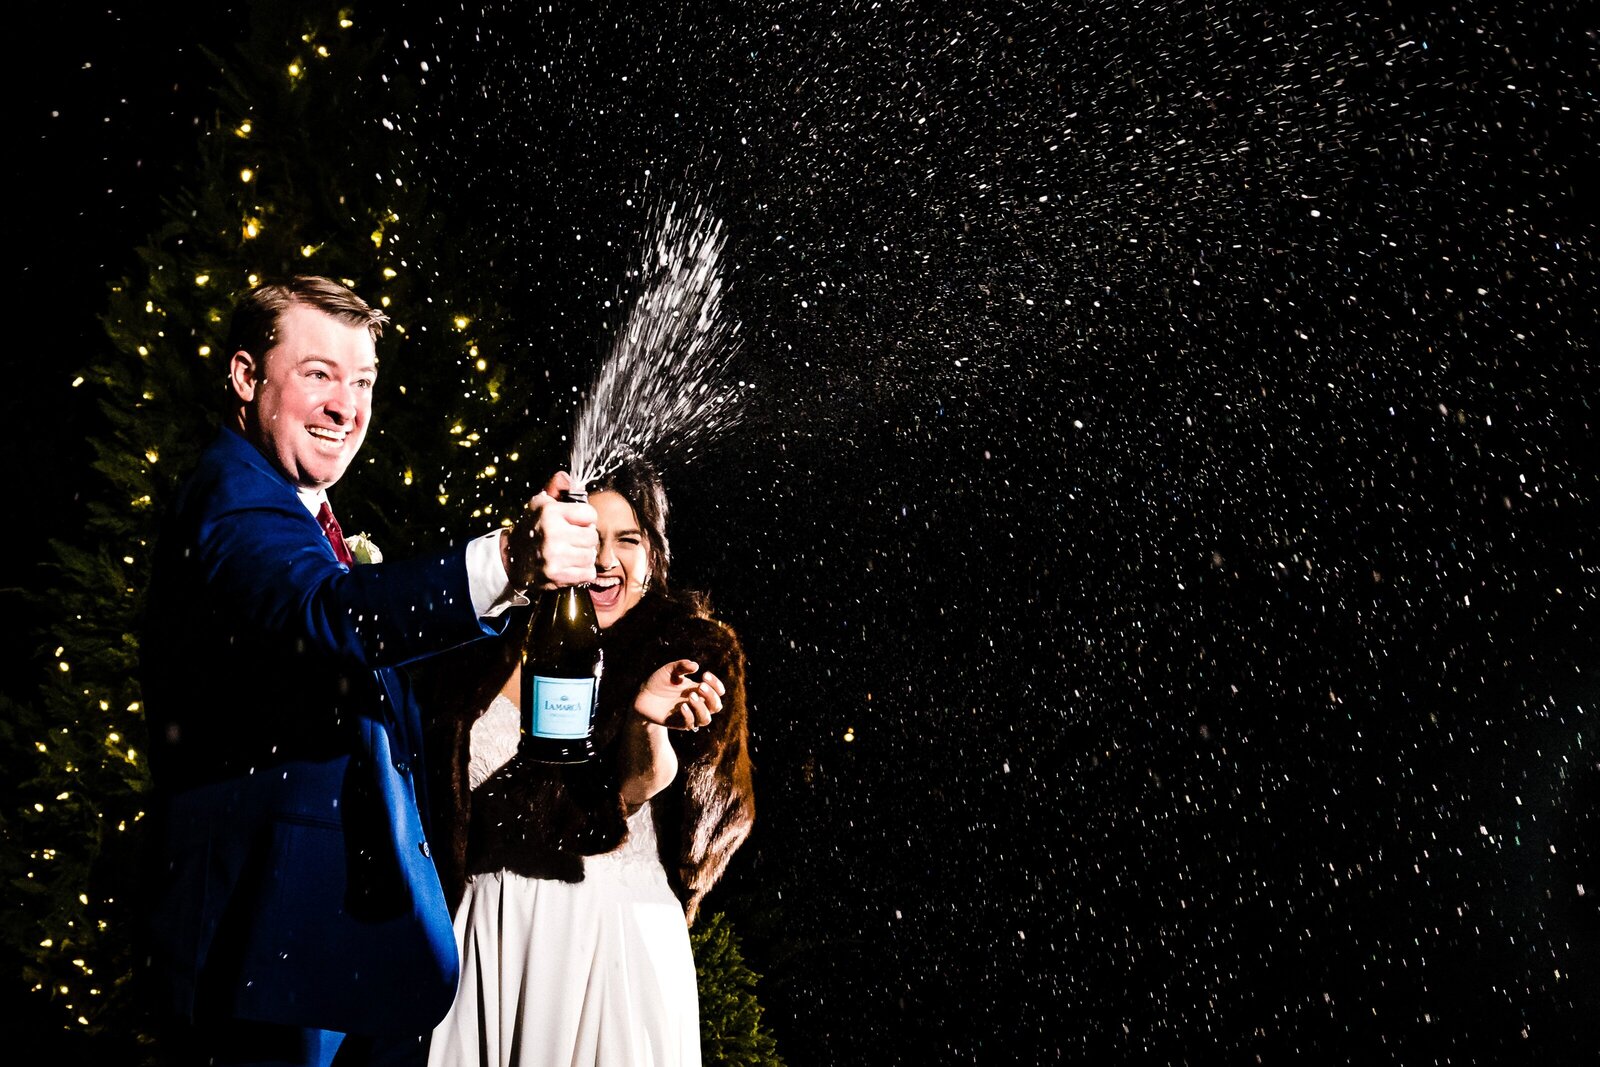 bride and groom pop champagne and the spray is backlit on the dark sky behind them